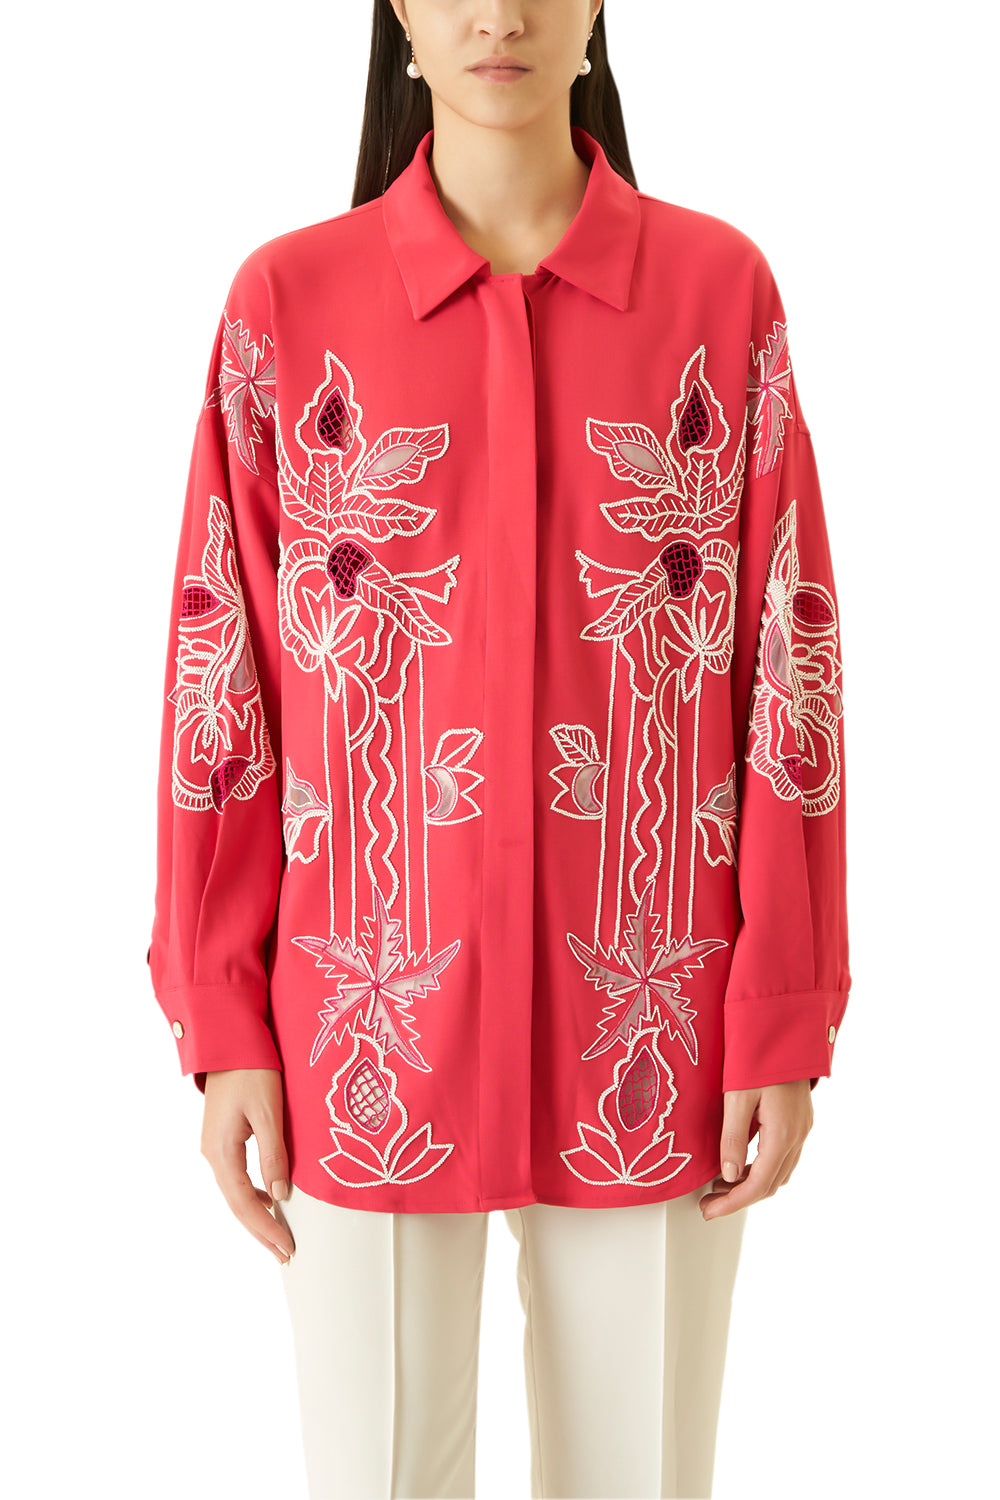 Pink Cutwork Shirt with Beads